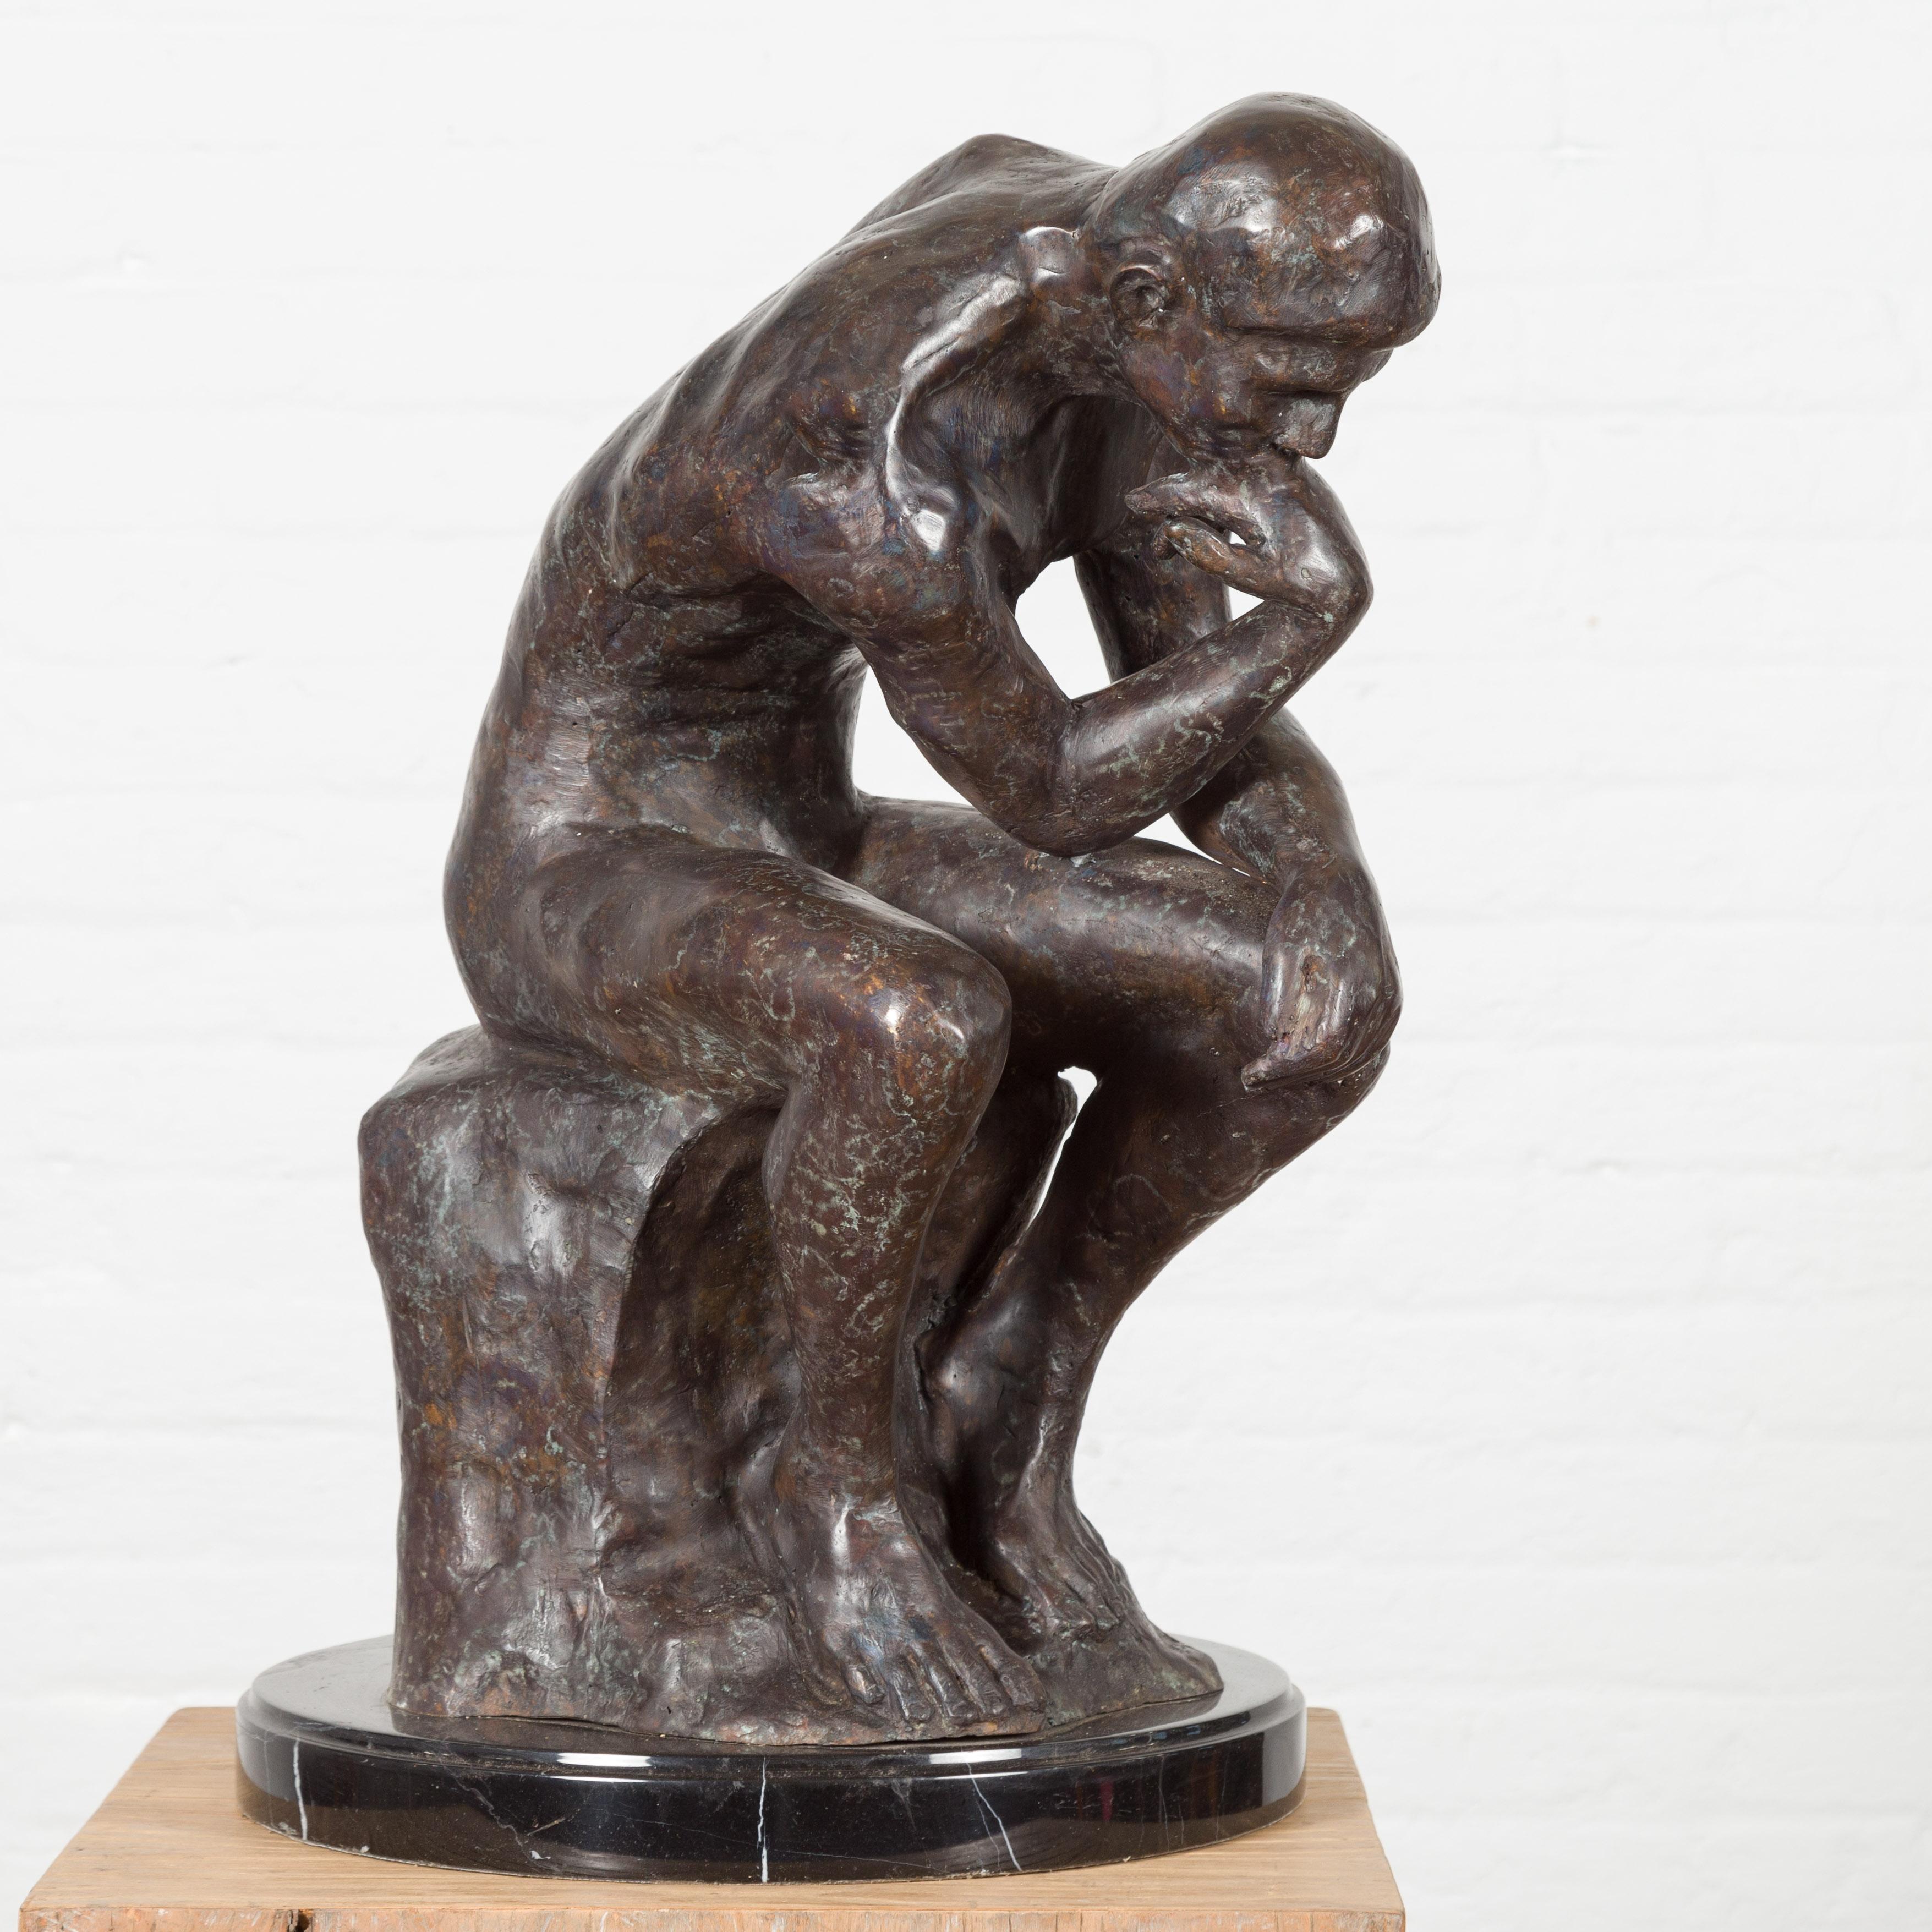 A lost wax cast bronze sculpture, inspired by Auguste Rodin's The Thinker, in dark patina on black marble base. This item is available now and this is also a current production. Created with the traditional technique of the lost-wax (à la cire